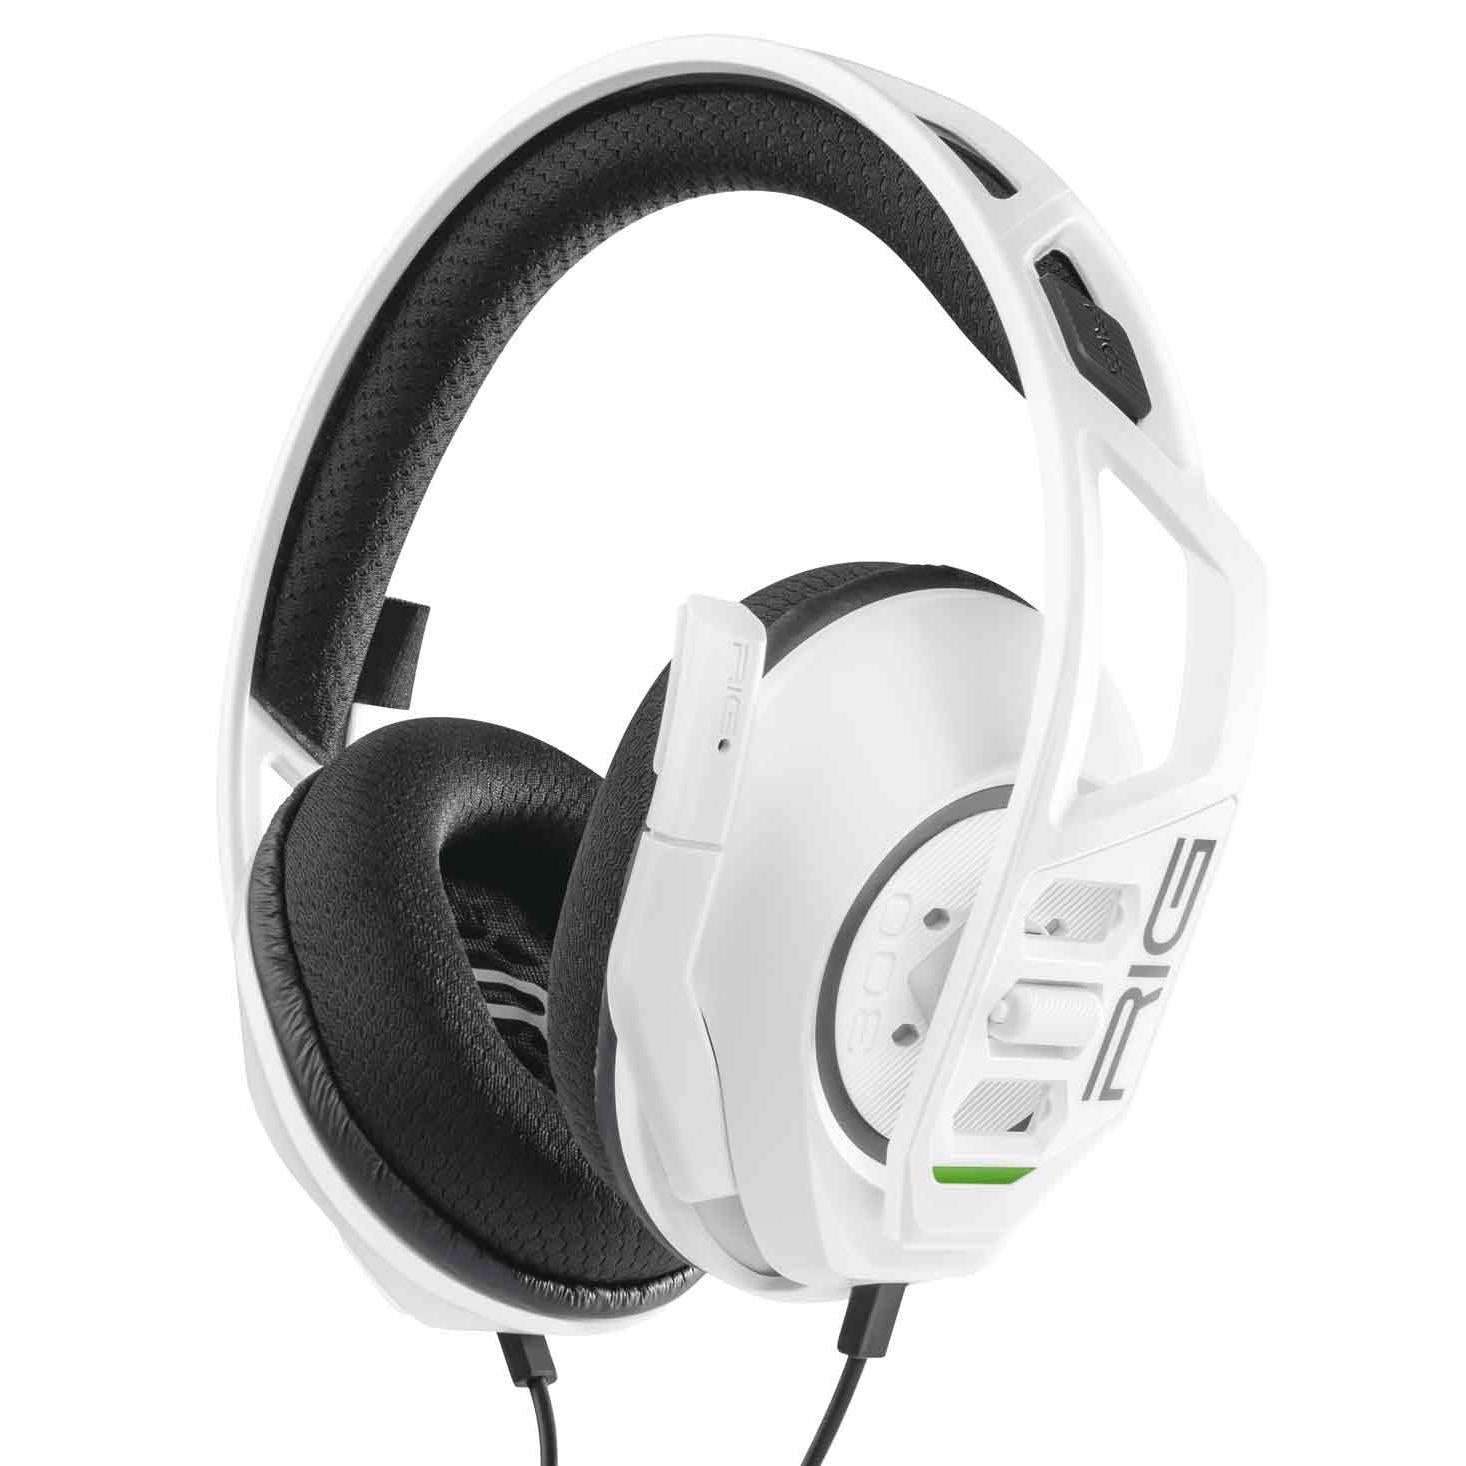 rig 300 pro hx gaming headset for xbox series x|s (white)